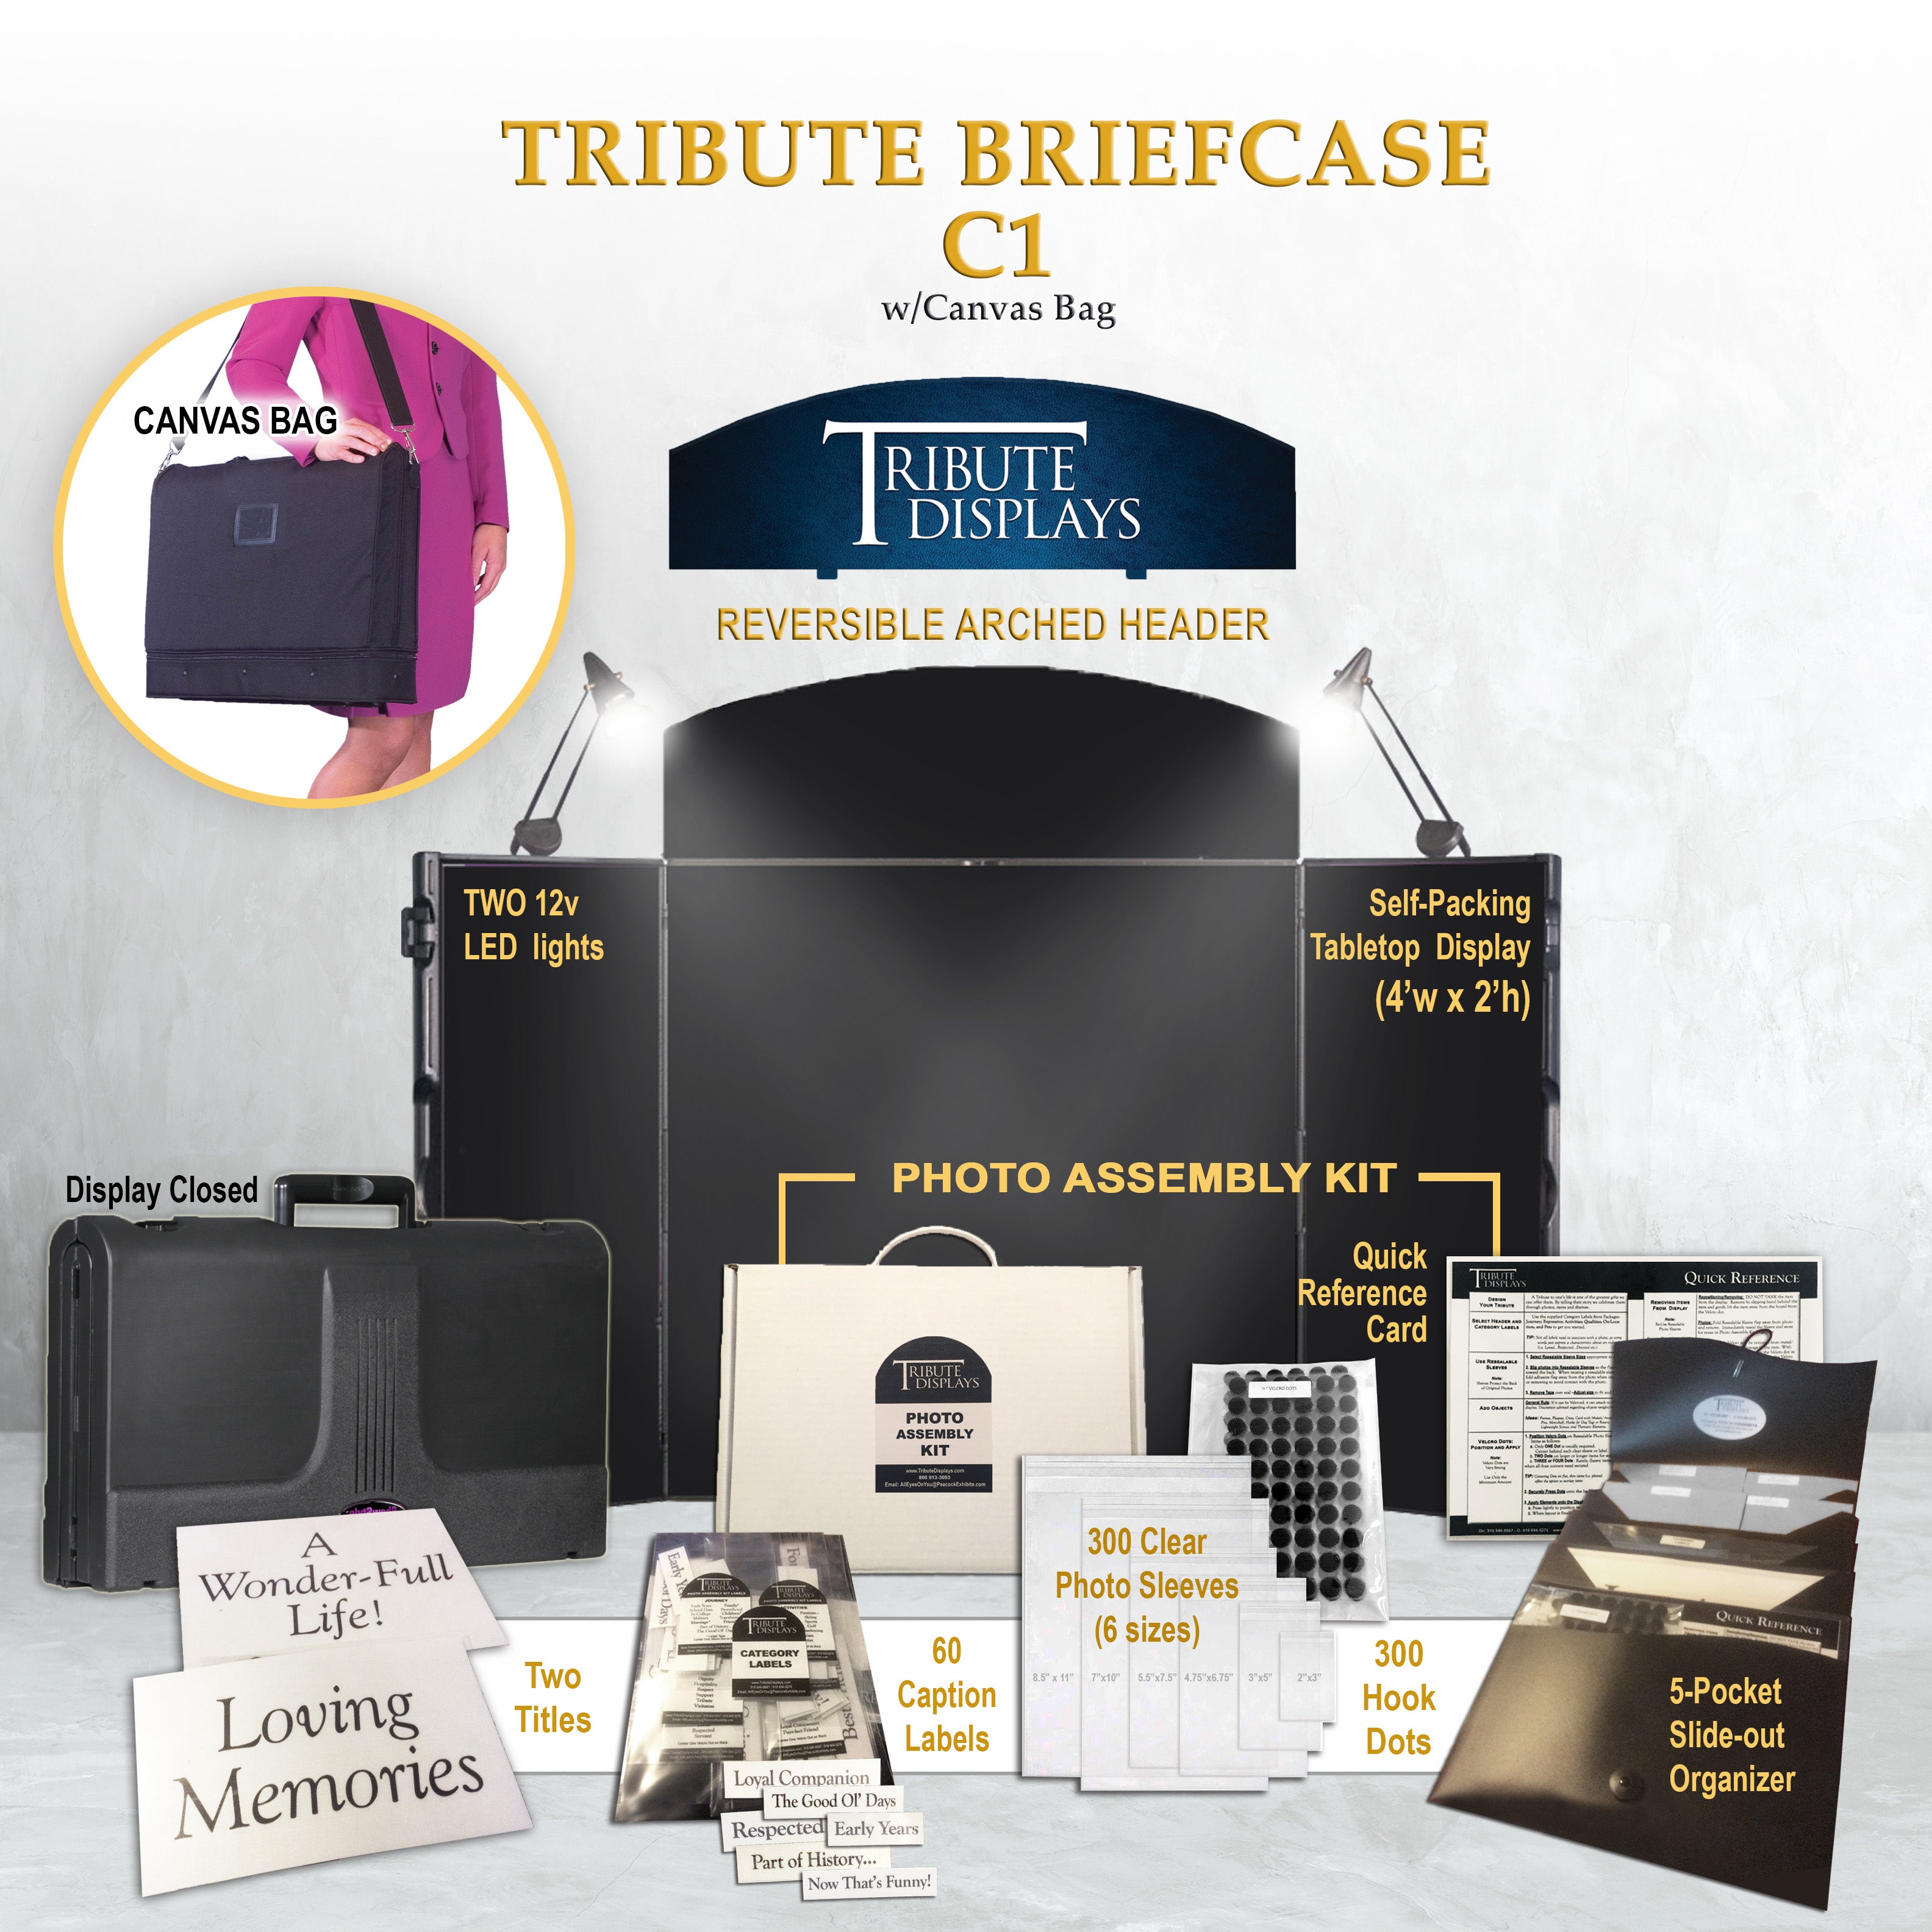 System Bundle "AAC": Tribute "Triple" - (Double Max + Briefcase)